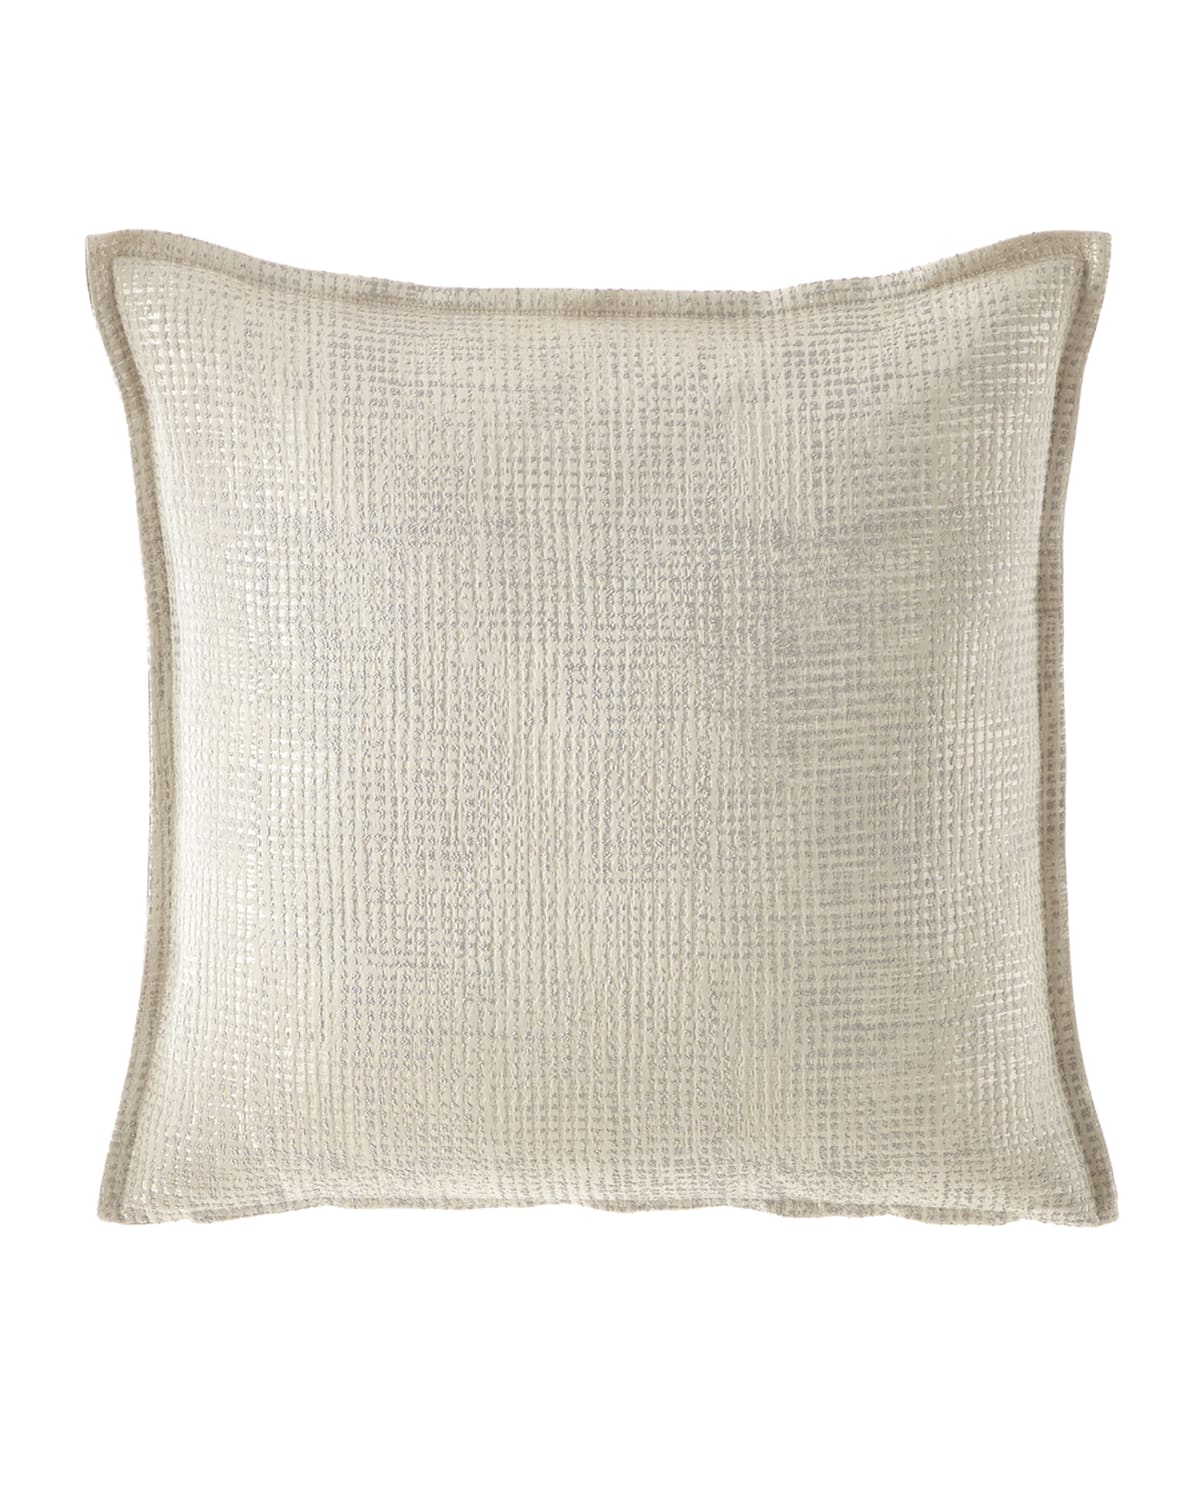 Image Fino Lino Linen & Lace Hammered Throw Pillow